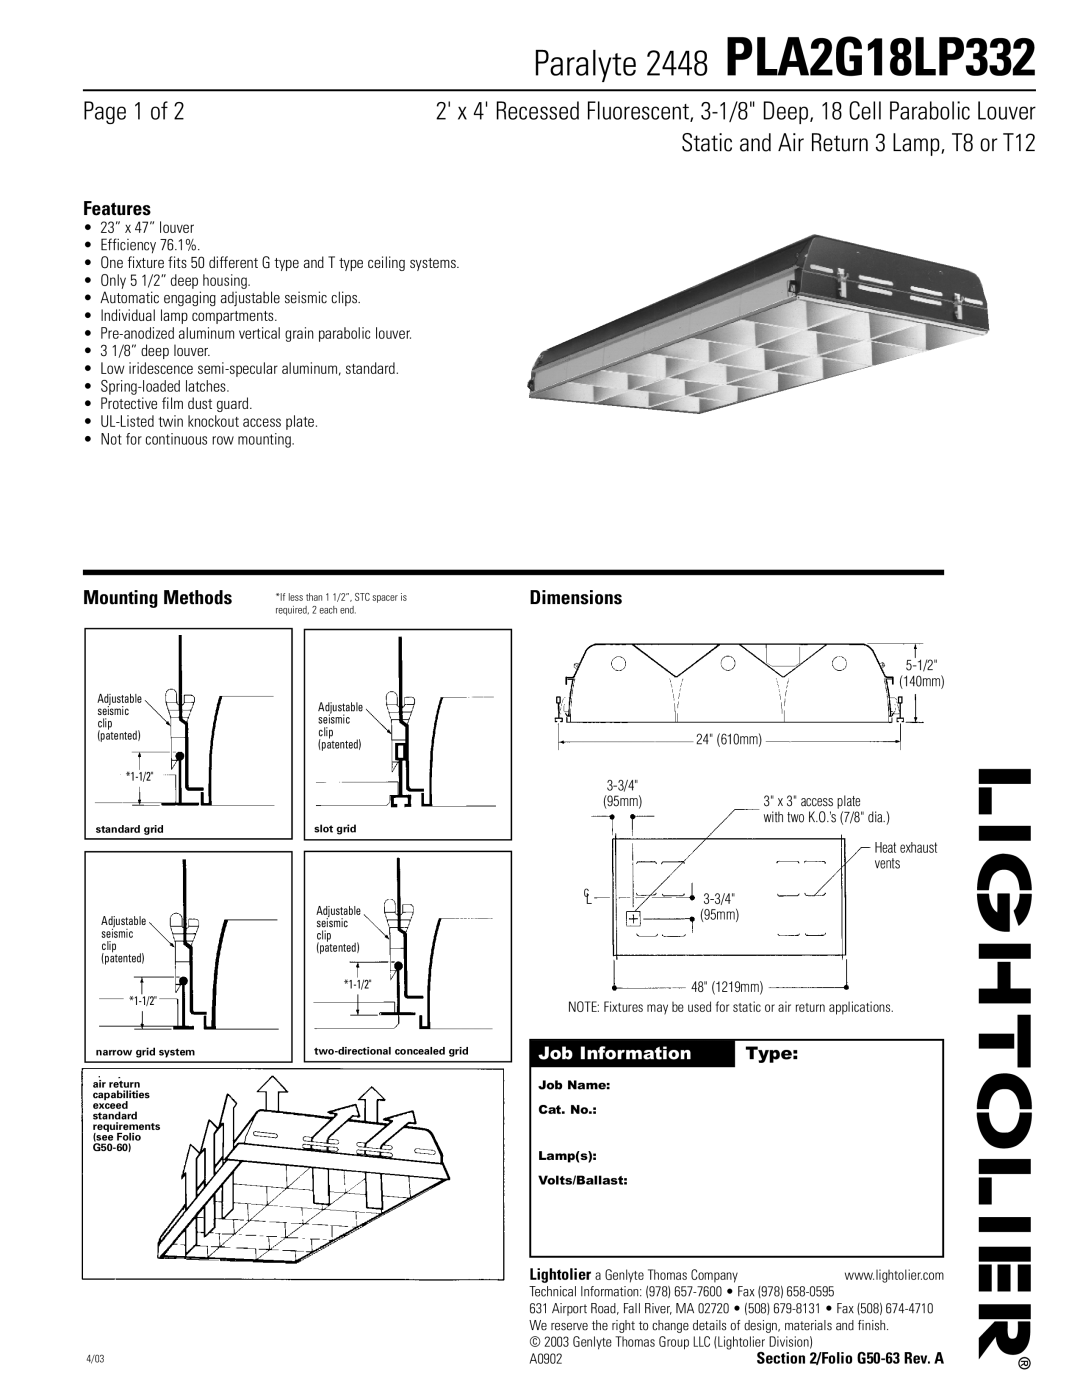 Lightolier PLA2G18LP332 dimensions Page 1 of, Static and Air Return 3 Lamp, T8 or T12, Features, Mounting Methods 